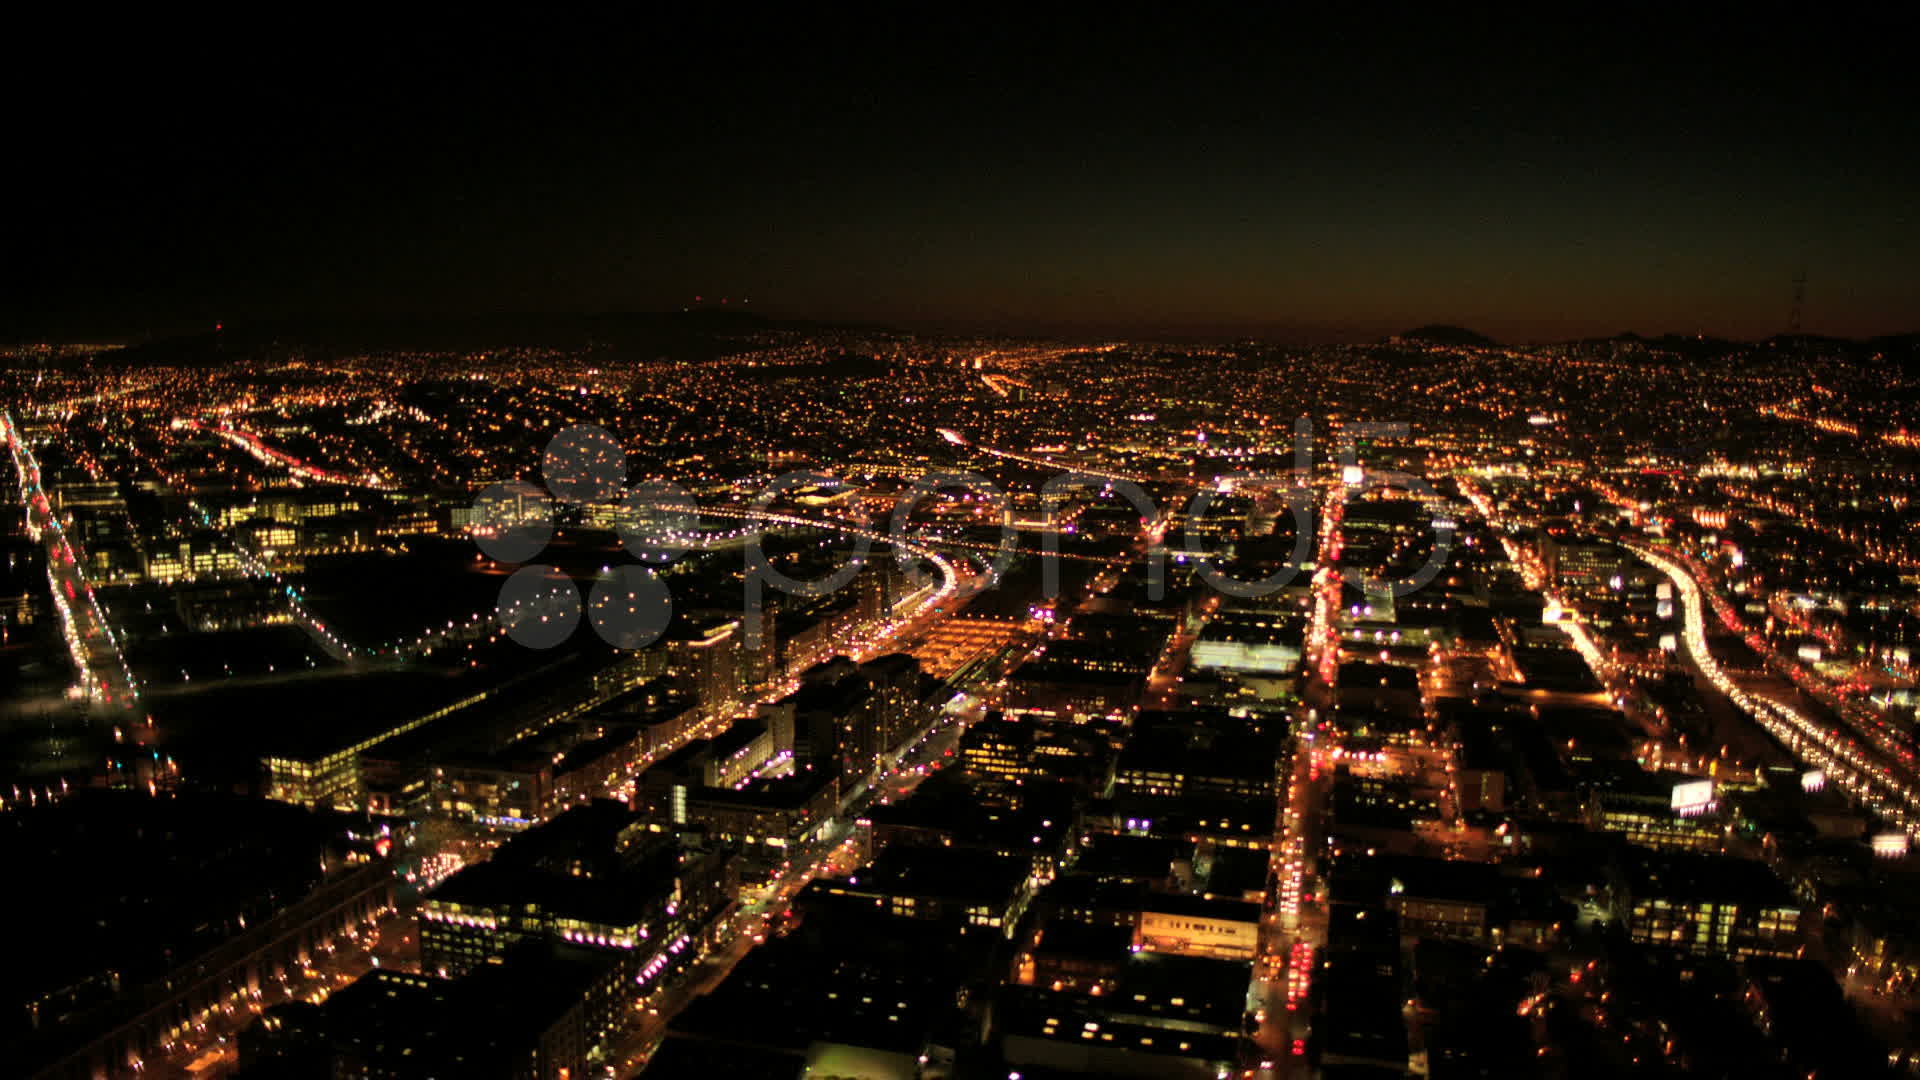 Aerial photo of city during night time